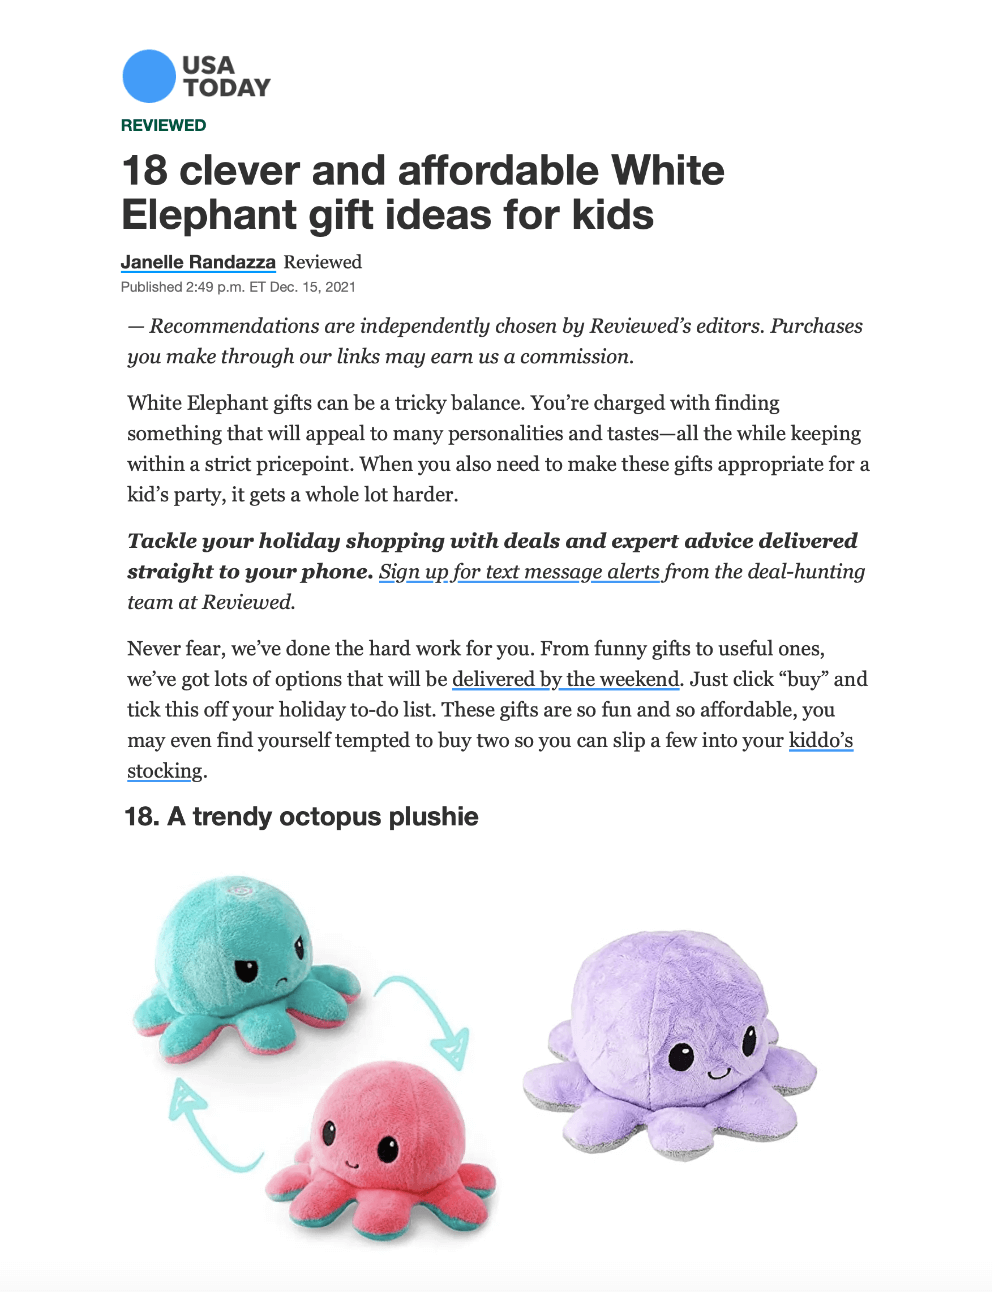 18 Clever and Affordable White Elephant Gift Ideas For Kids
Featured Brands include:TeeTurtle

Read More